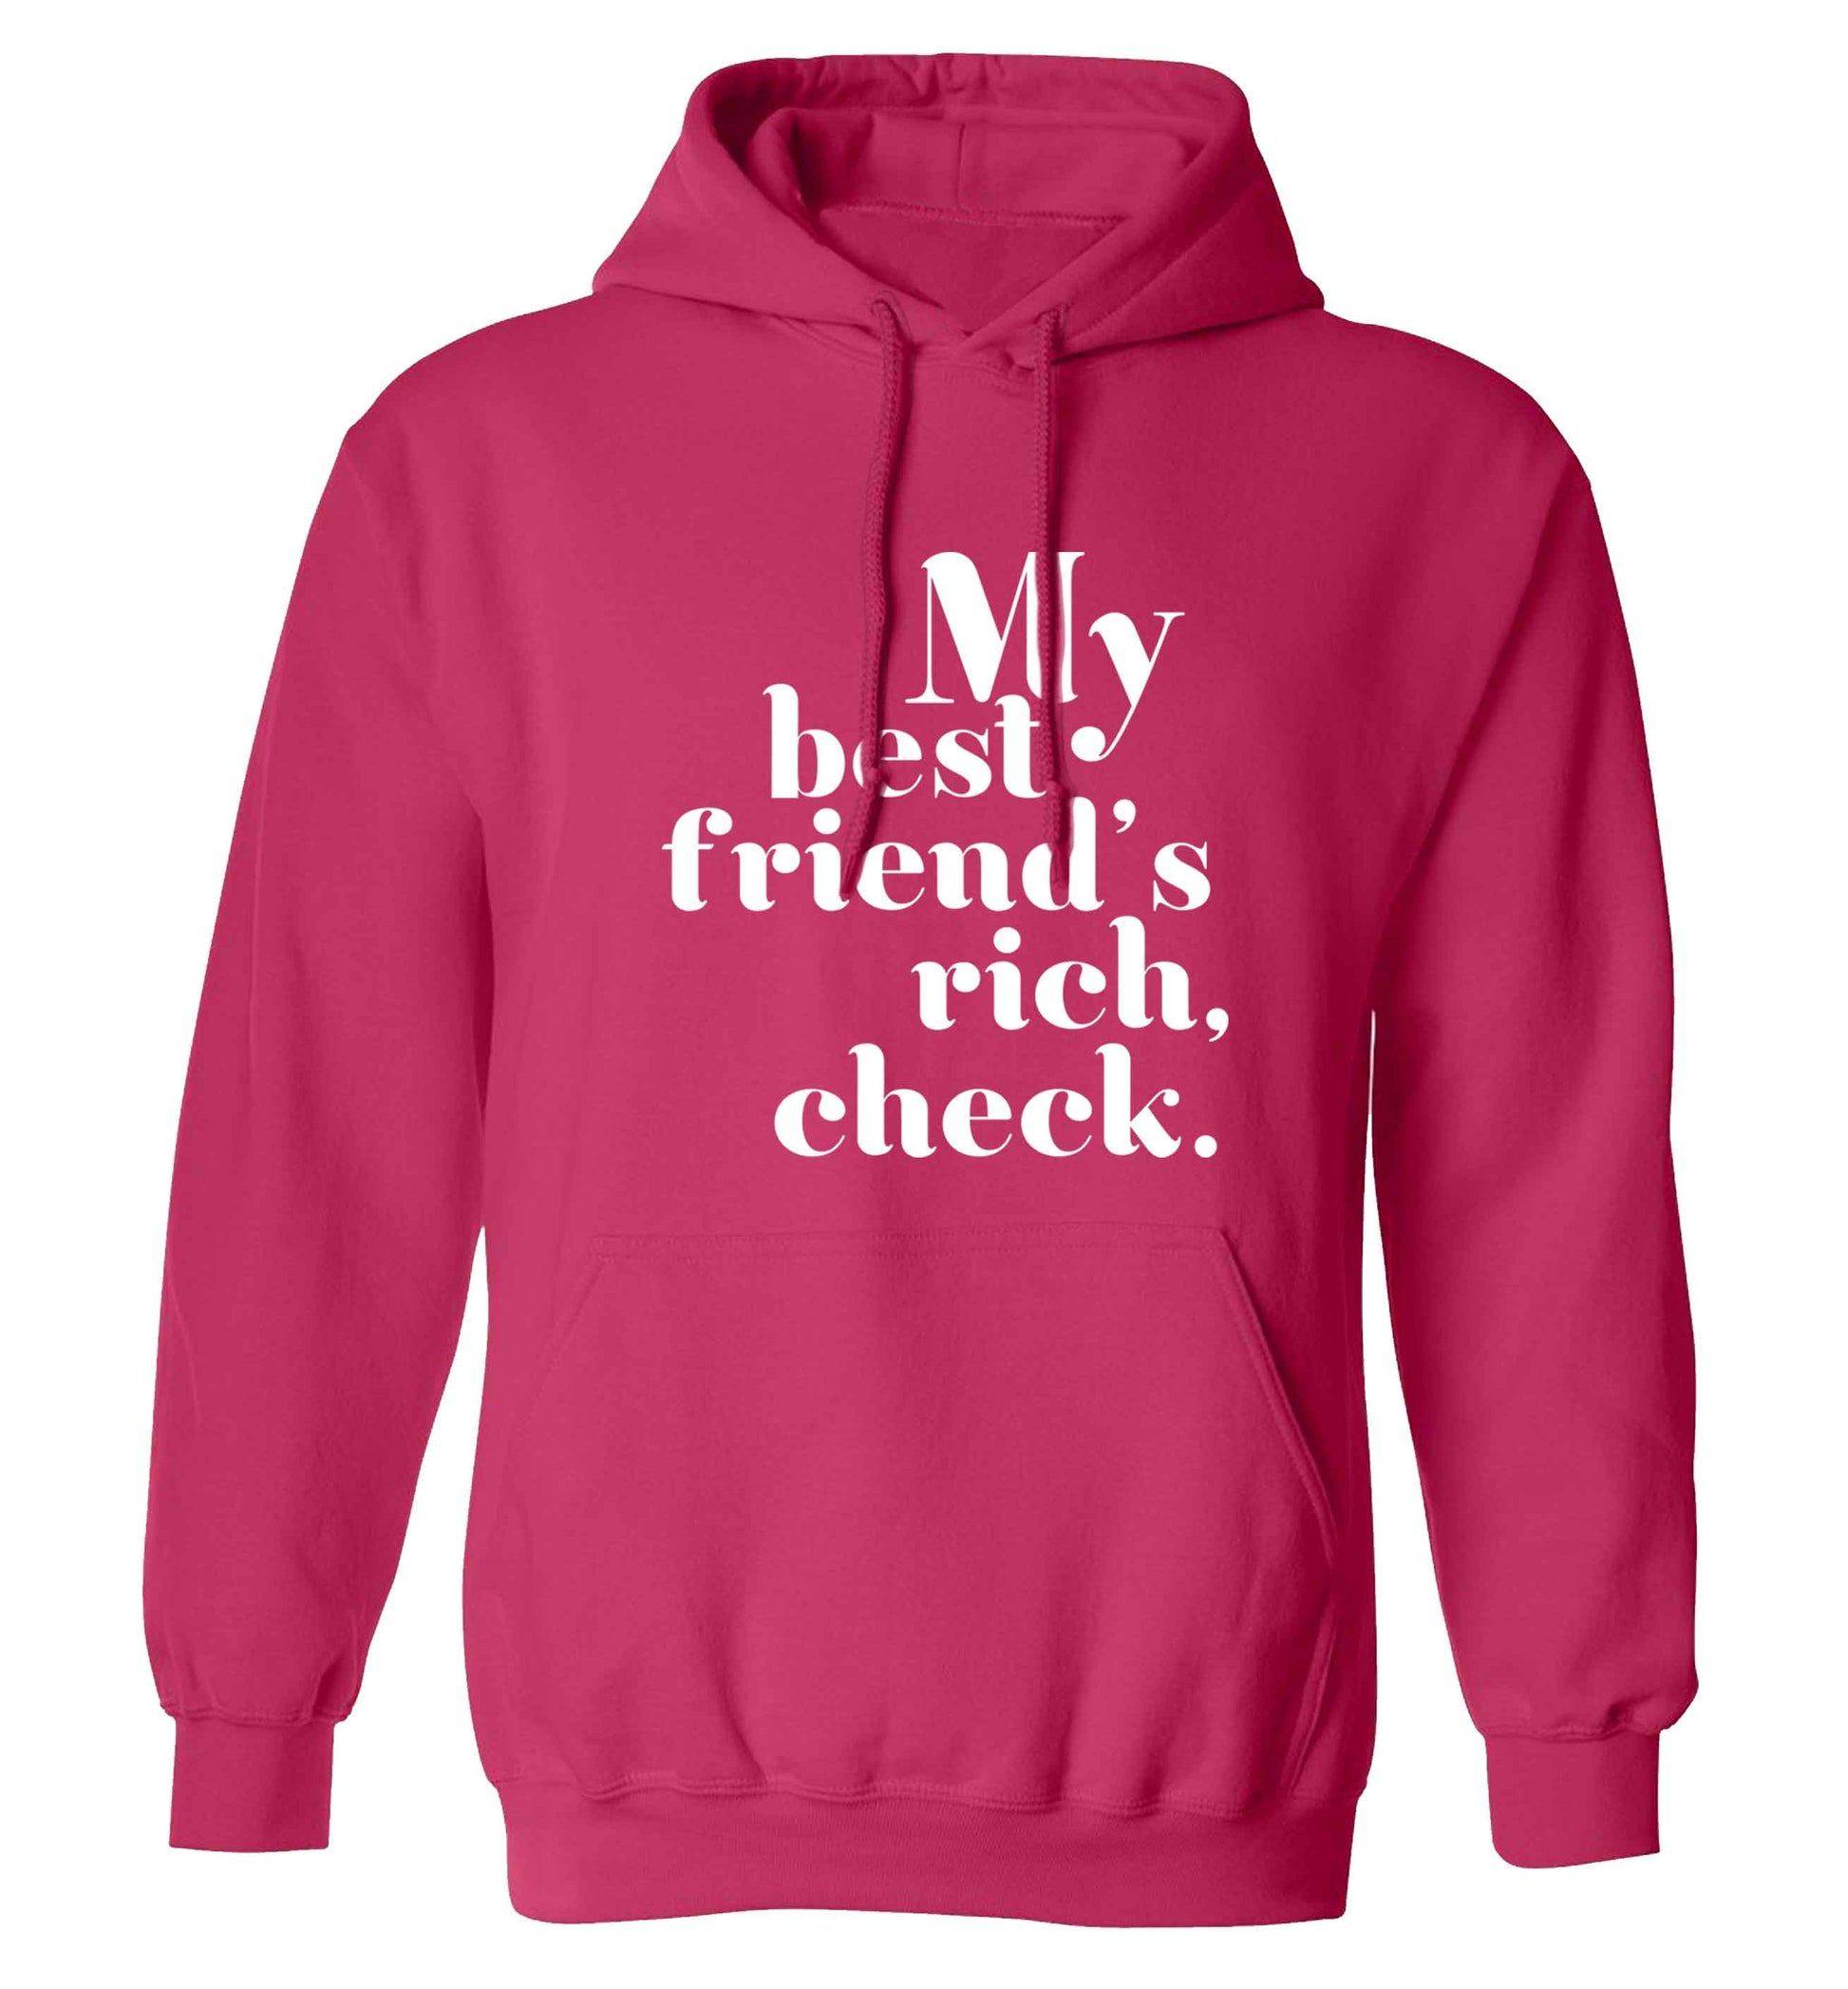 Got a rich best friend? Why not ask them to get you this, just let us  know and we'll tripple the price ;)  adults unisex pink hoodie 2XL